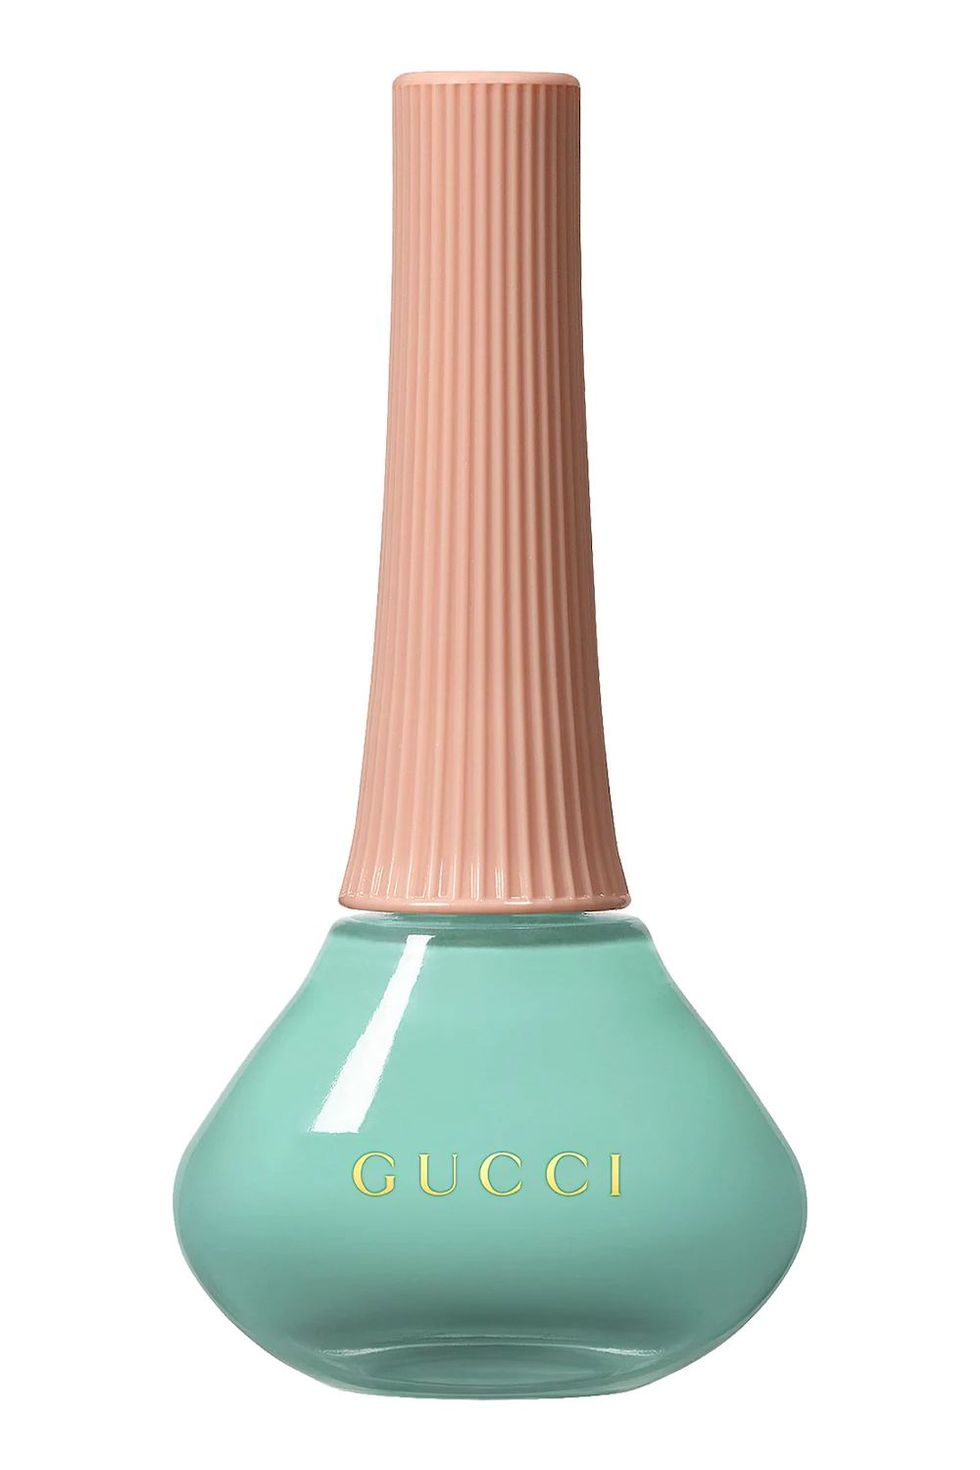 Gucci Vernis À Ongles Nail Polish in Dorothy Turquoise